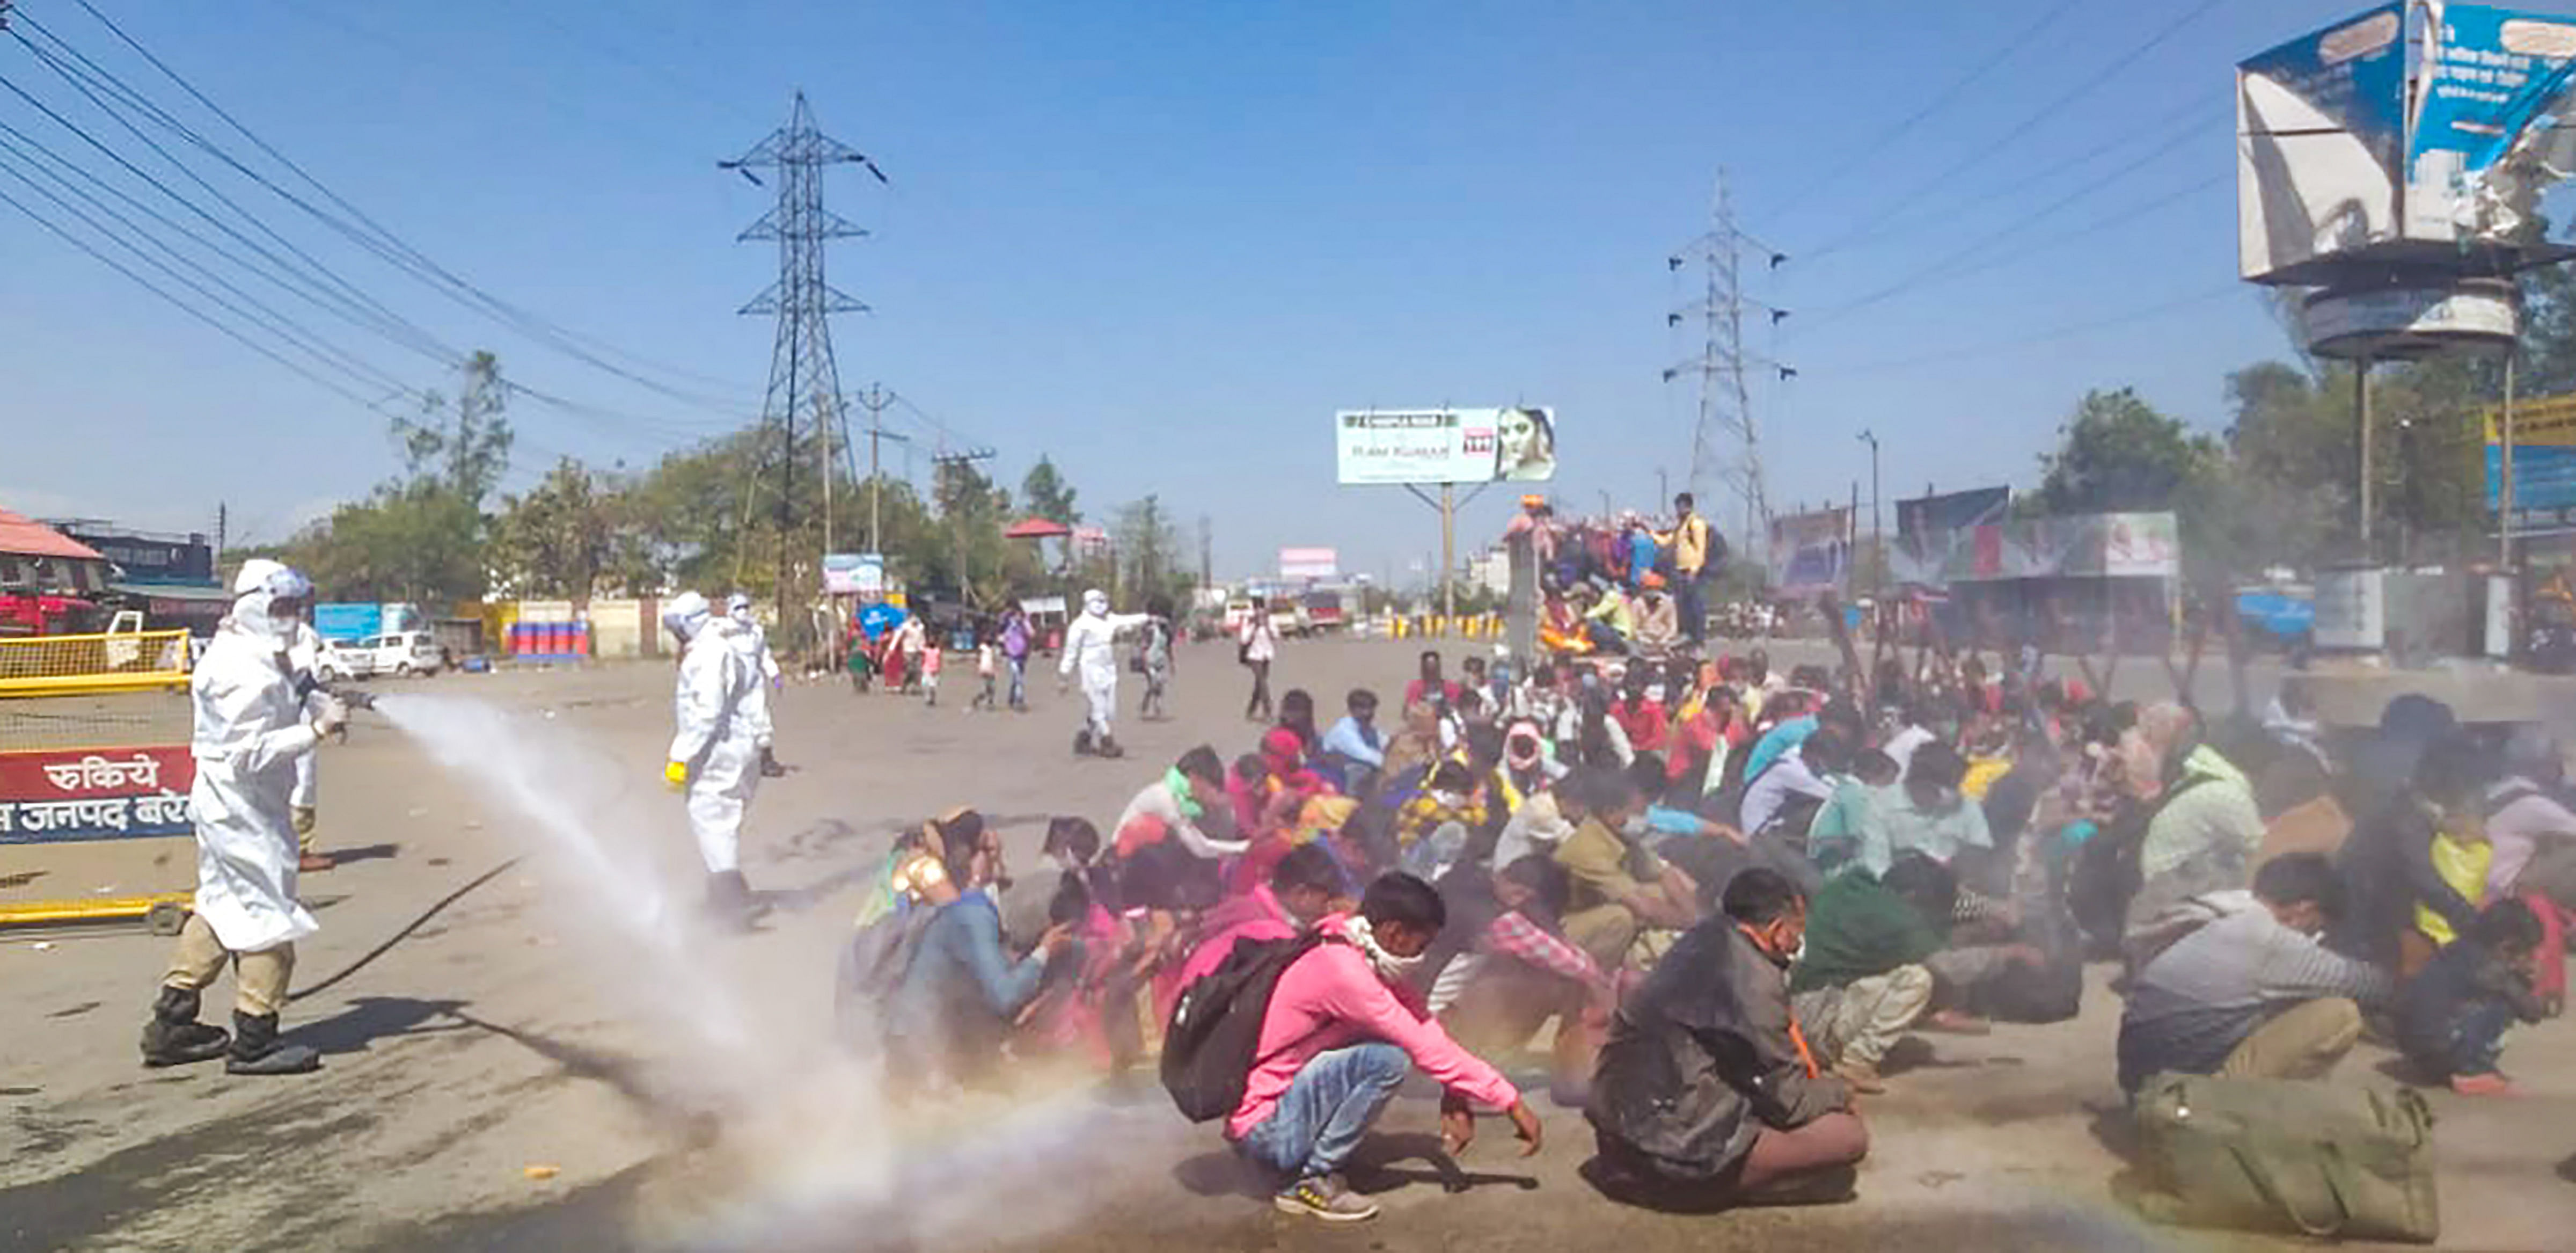 A screen grab shows healthcare workers, in protective suits, spray a solution through hose pipe on migrants before allowing them to enter the town of Bareilly, Monday, March 30, 2020. The migrants reached the town due to thenationwide complete lockdown imosed to limit the spread of coronavirus. (PTI Photo)